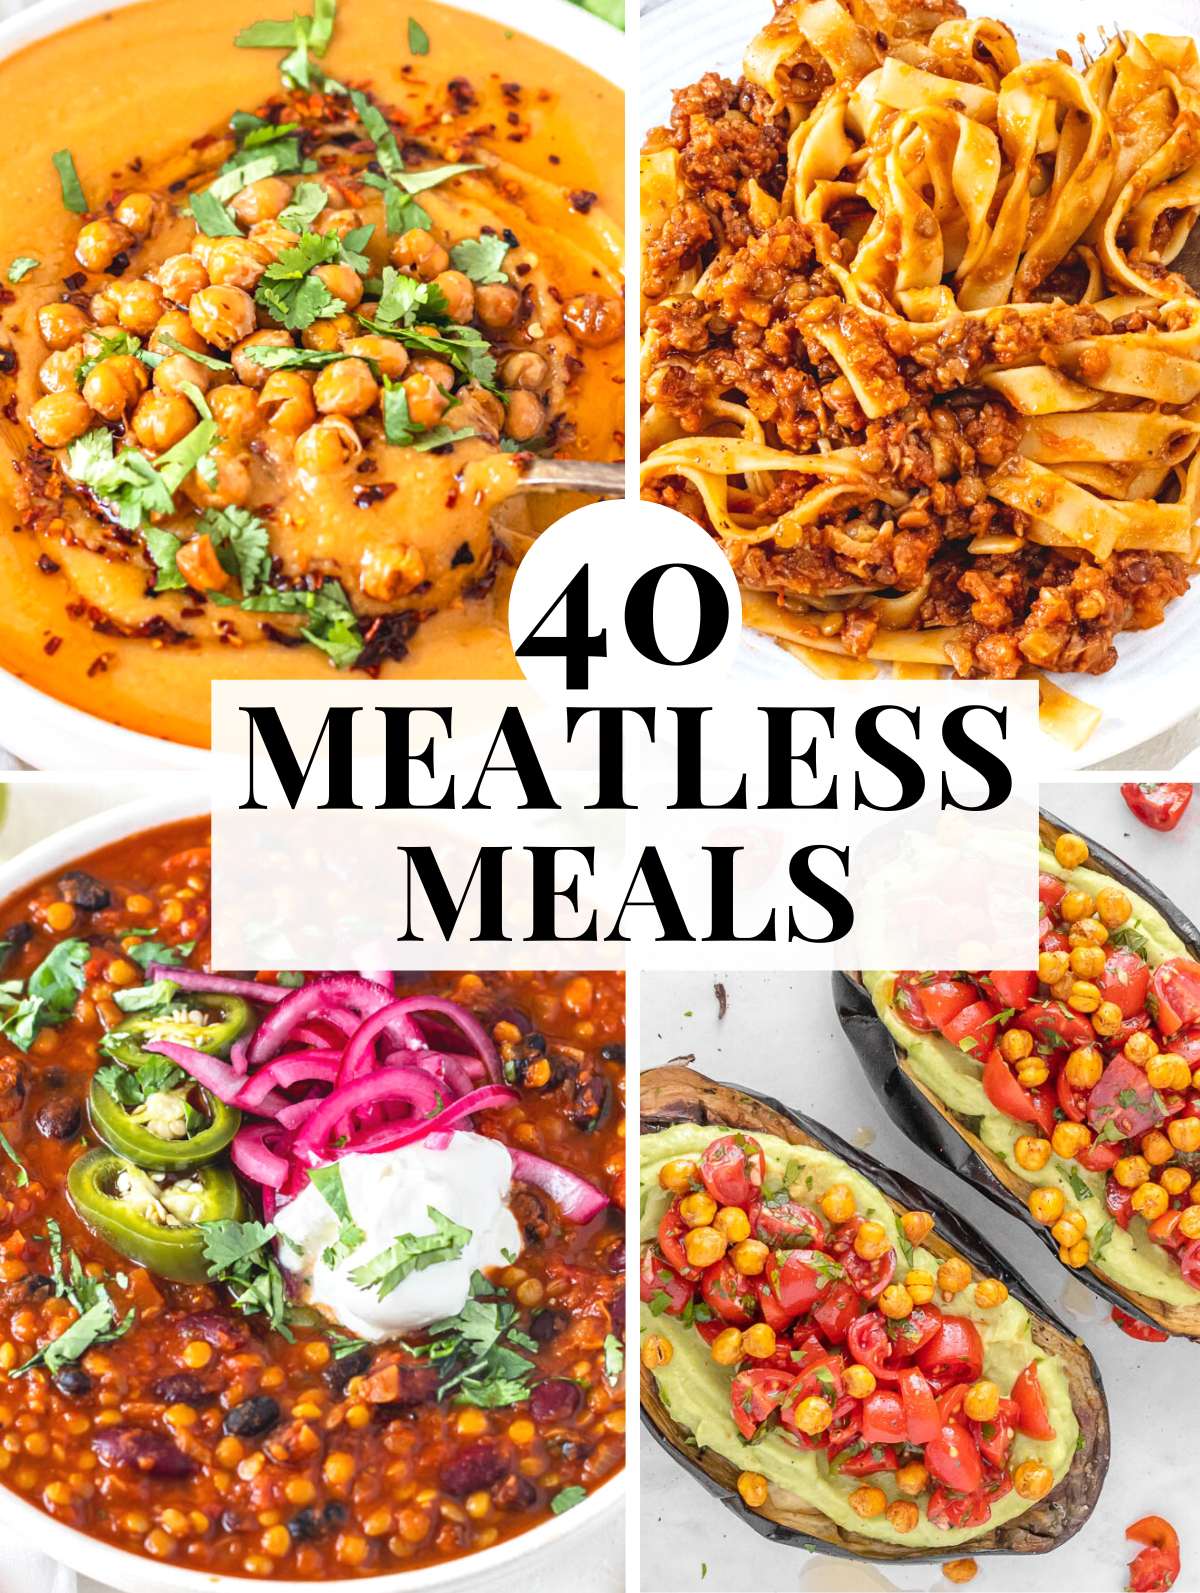 Meatless meals with dinner and lunch ideas